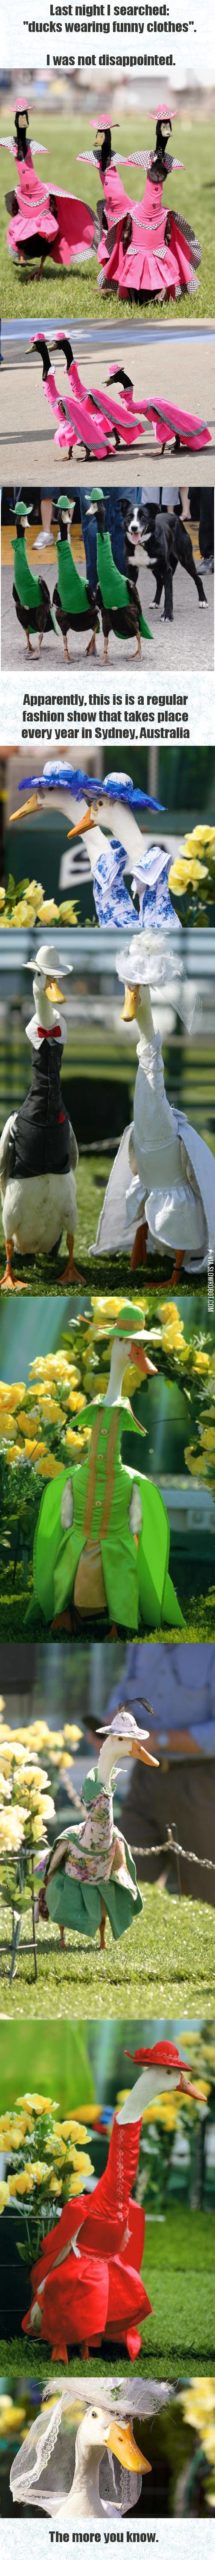 Ducks+Wearing+Funny+Clothes